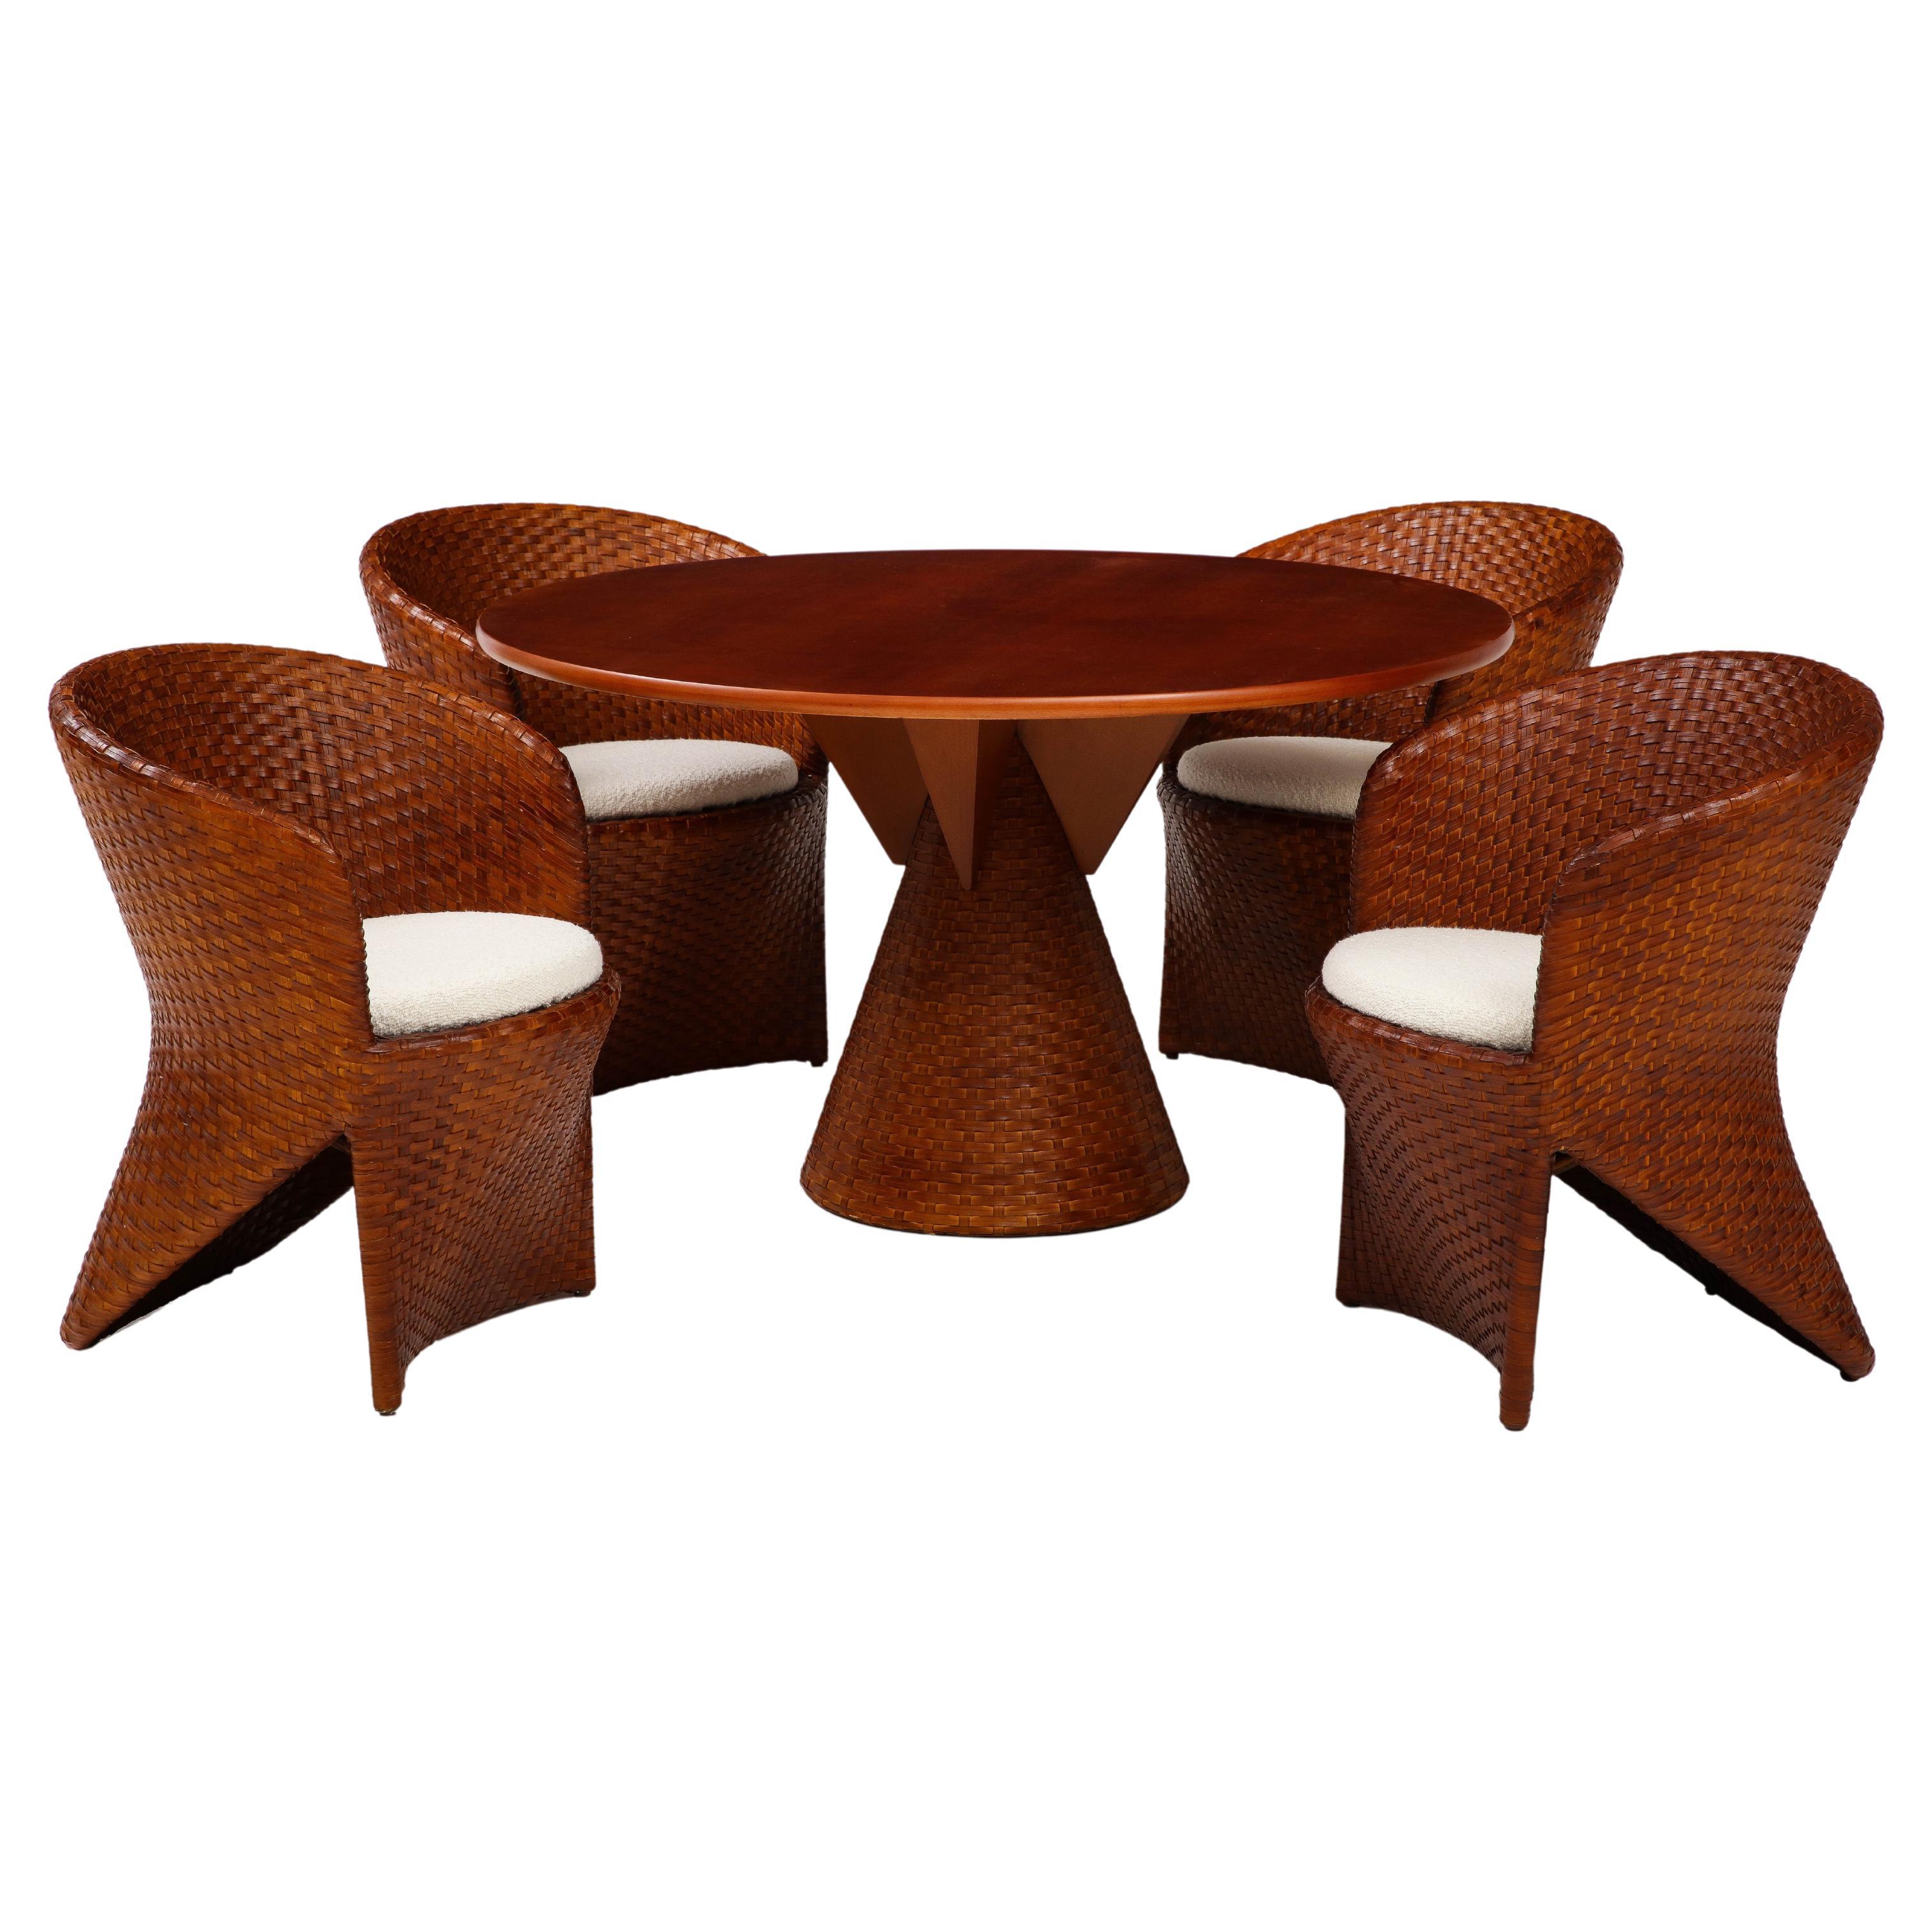 Tito Agnoli for Bonacina Rare Carabou Dining Set in Rattan and Cherry Wood, 1991 For Sale